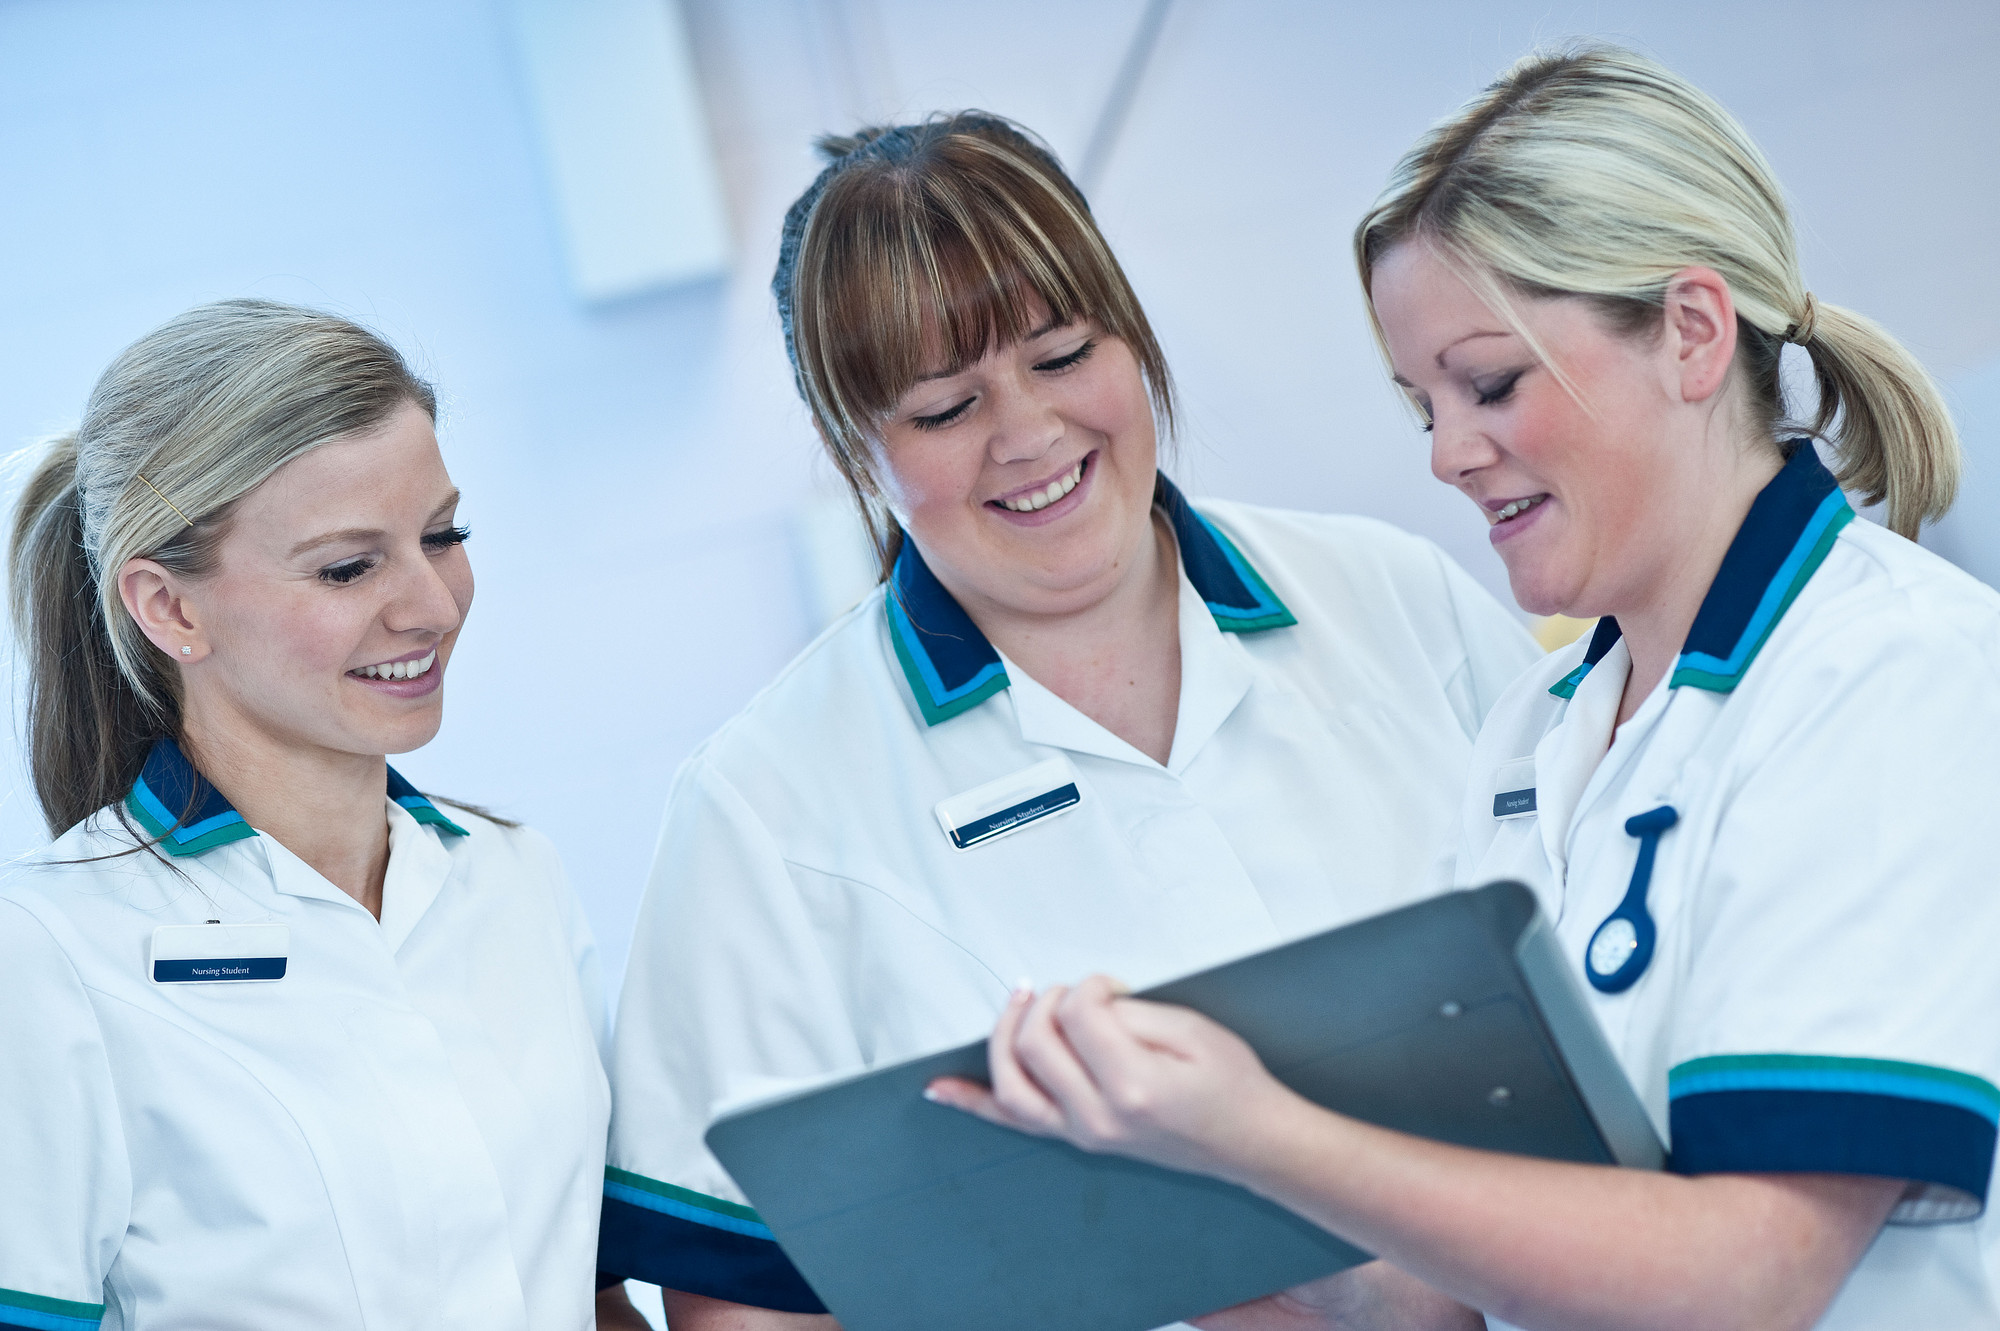 About the School of Nursing - Ulster University